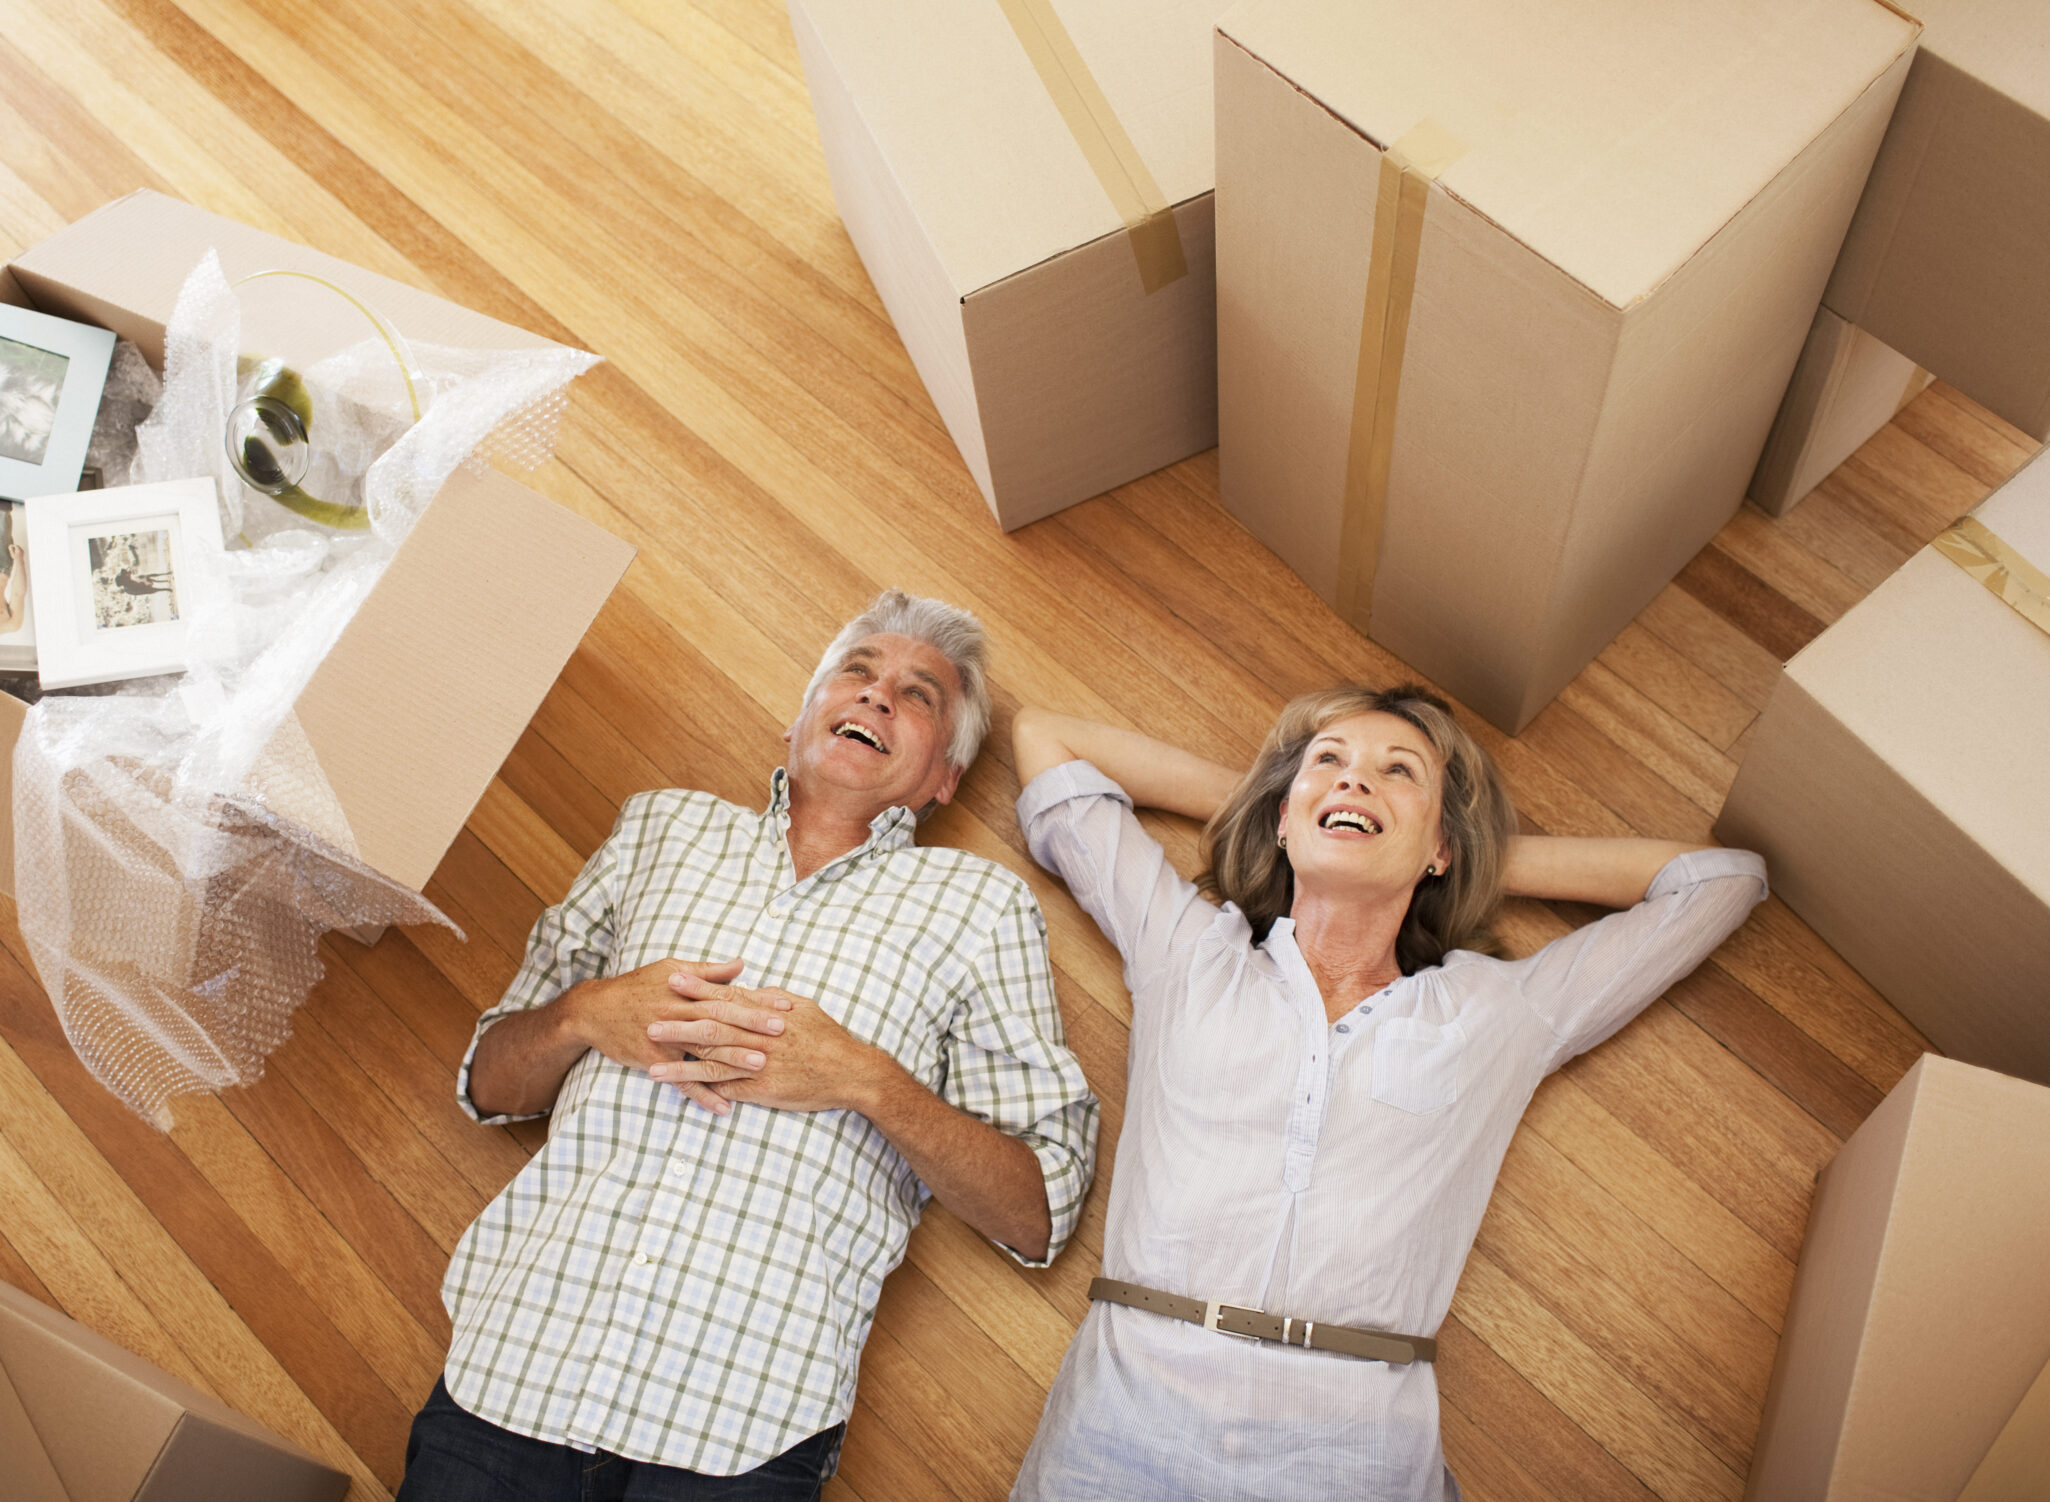 A senior couple lay on the floor, surrounded by moving boxes, daydreaming about their new place